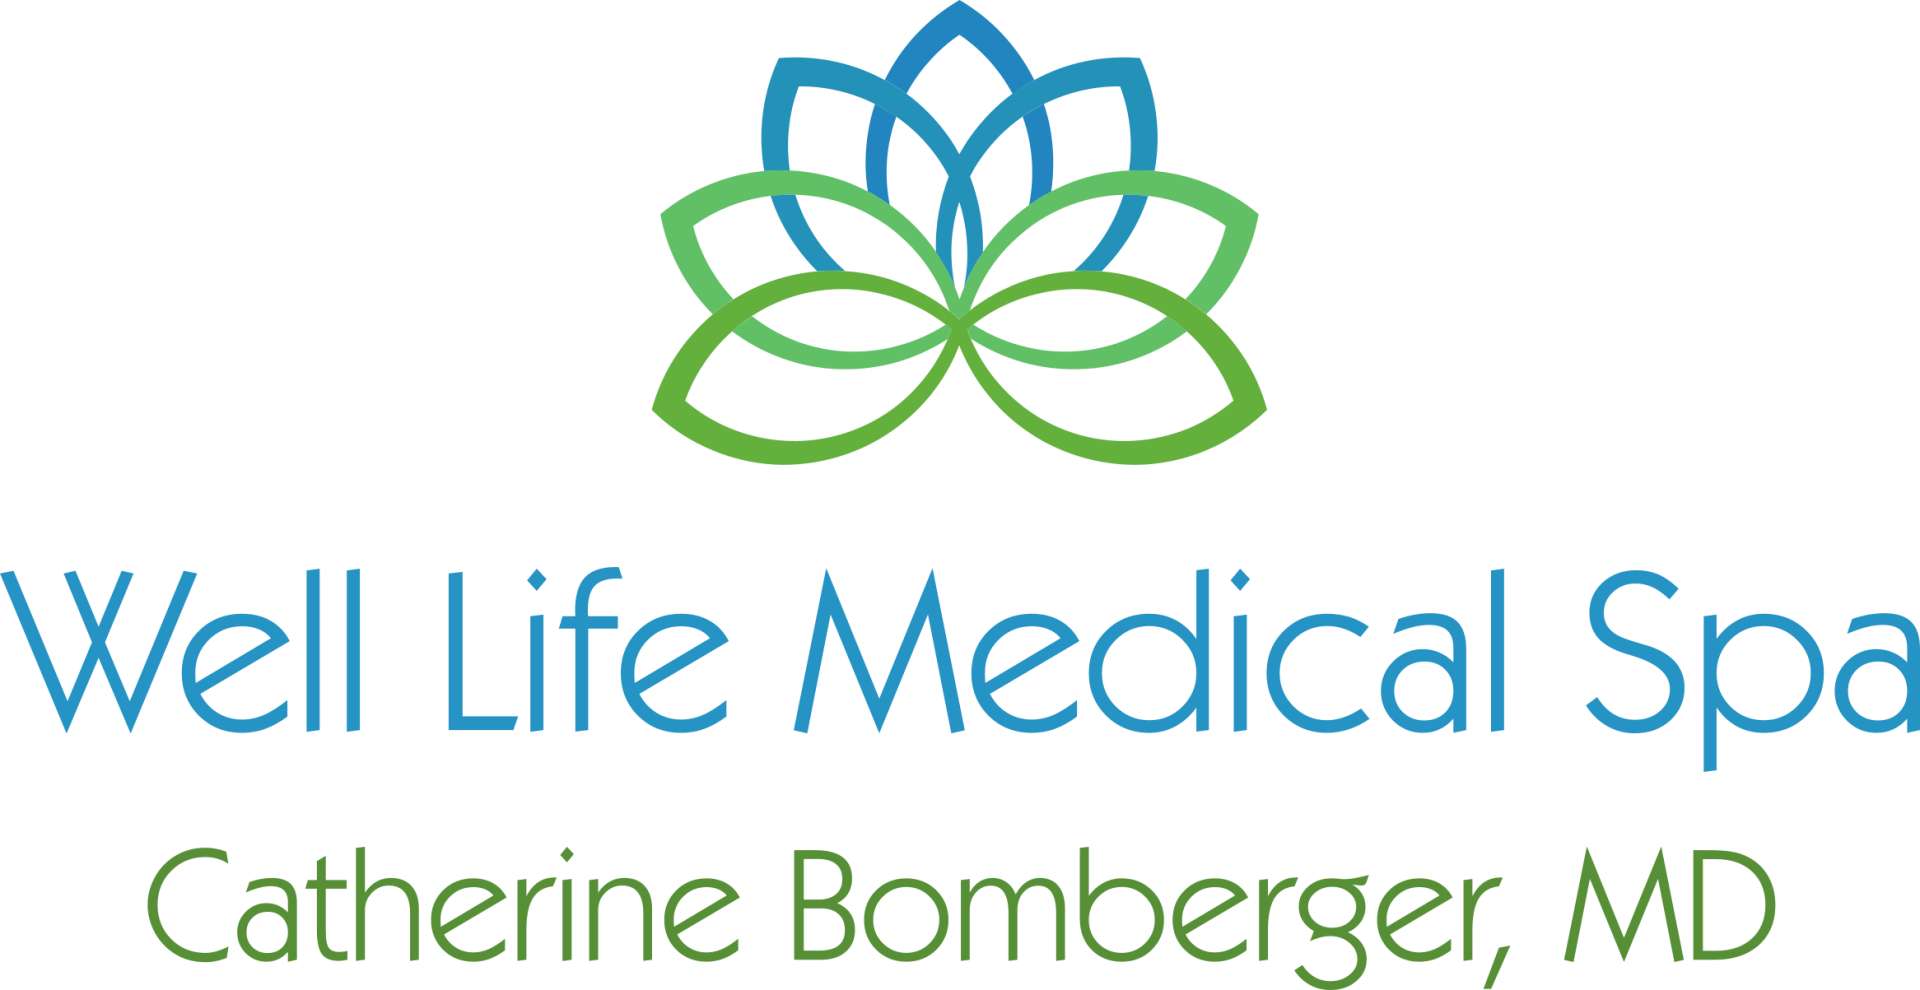 Well Life Medical Spa